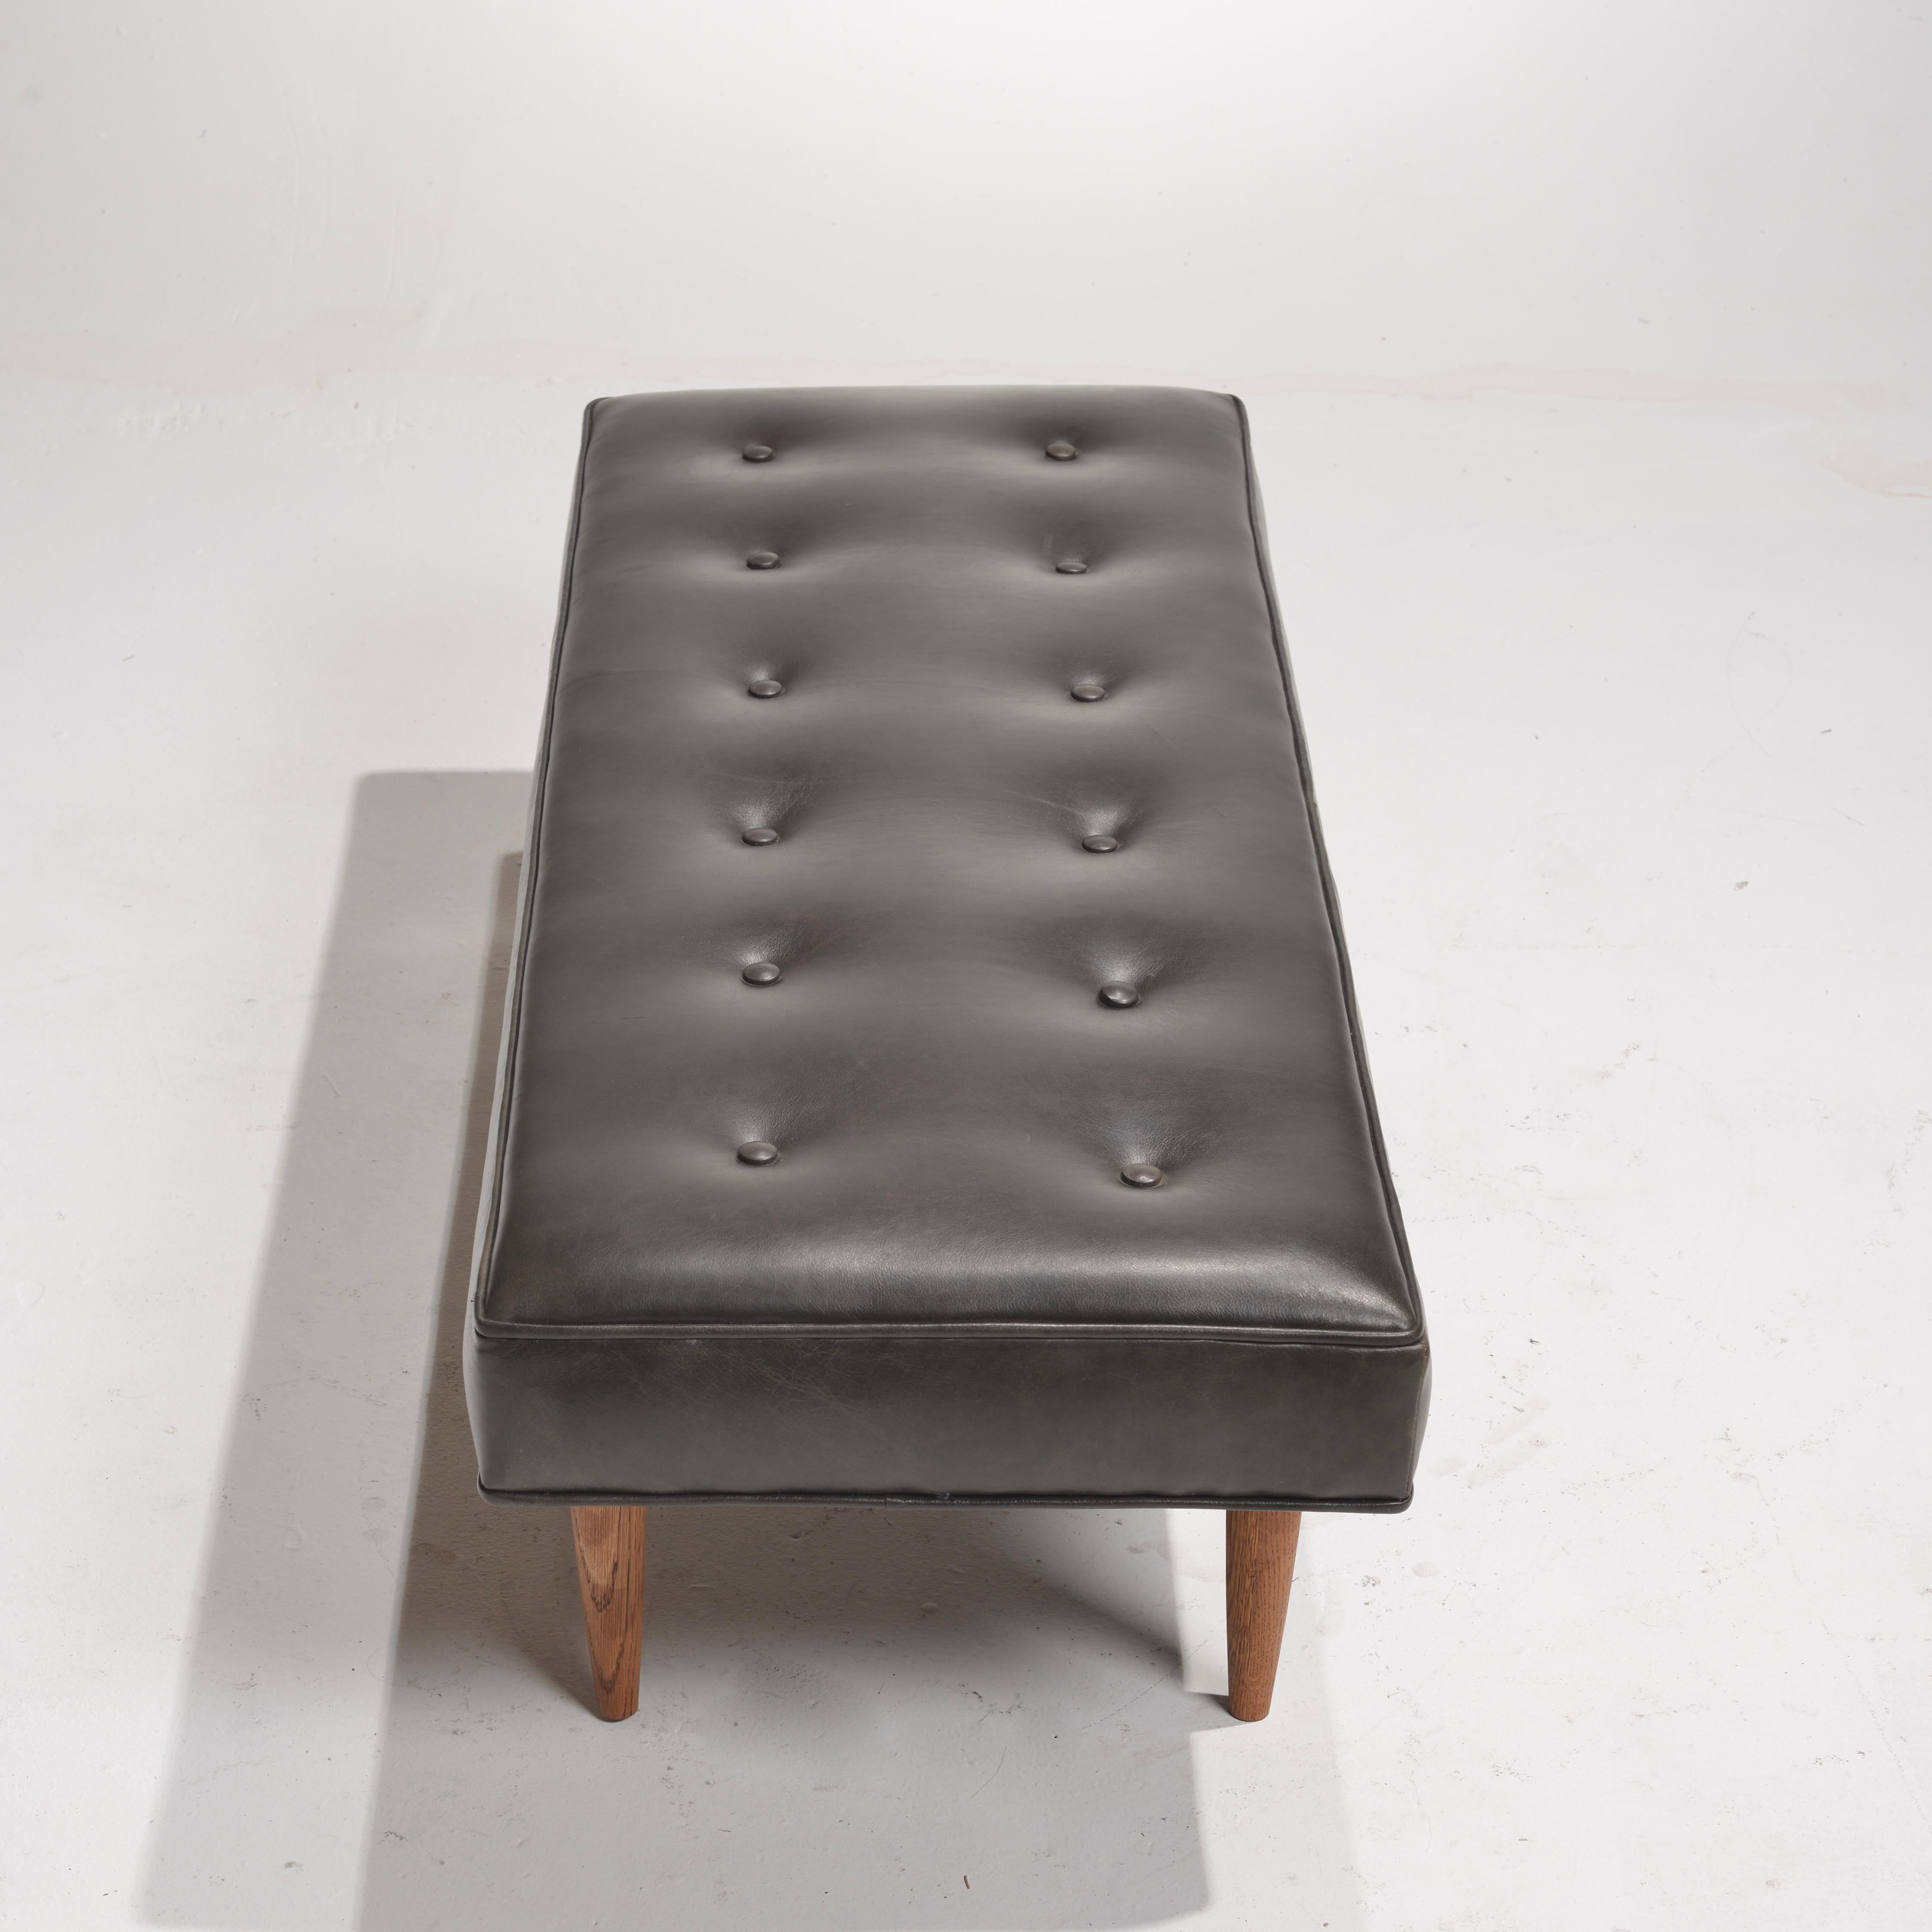 This wonderful bench was designed for Dunbar by Edward Wormely, c1960.  Newley upholstered in dark grey/black Italian leather.  On display in our Los Angeles showroom.  